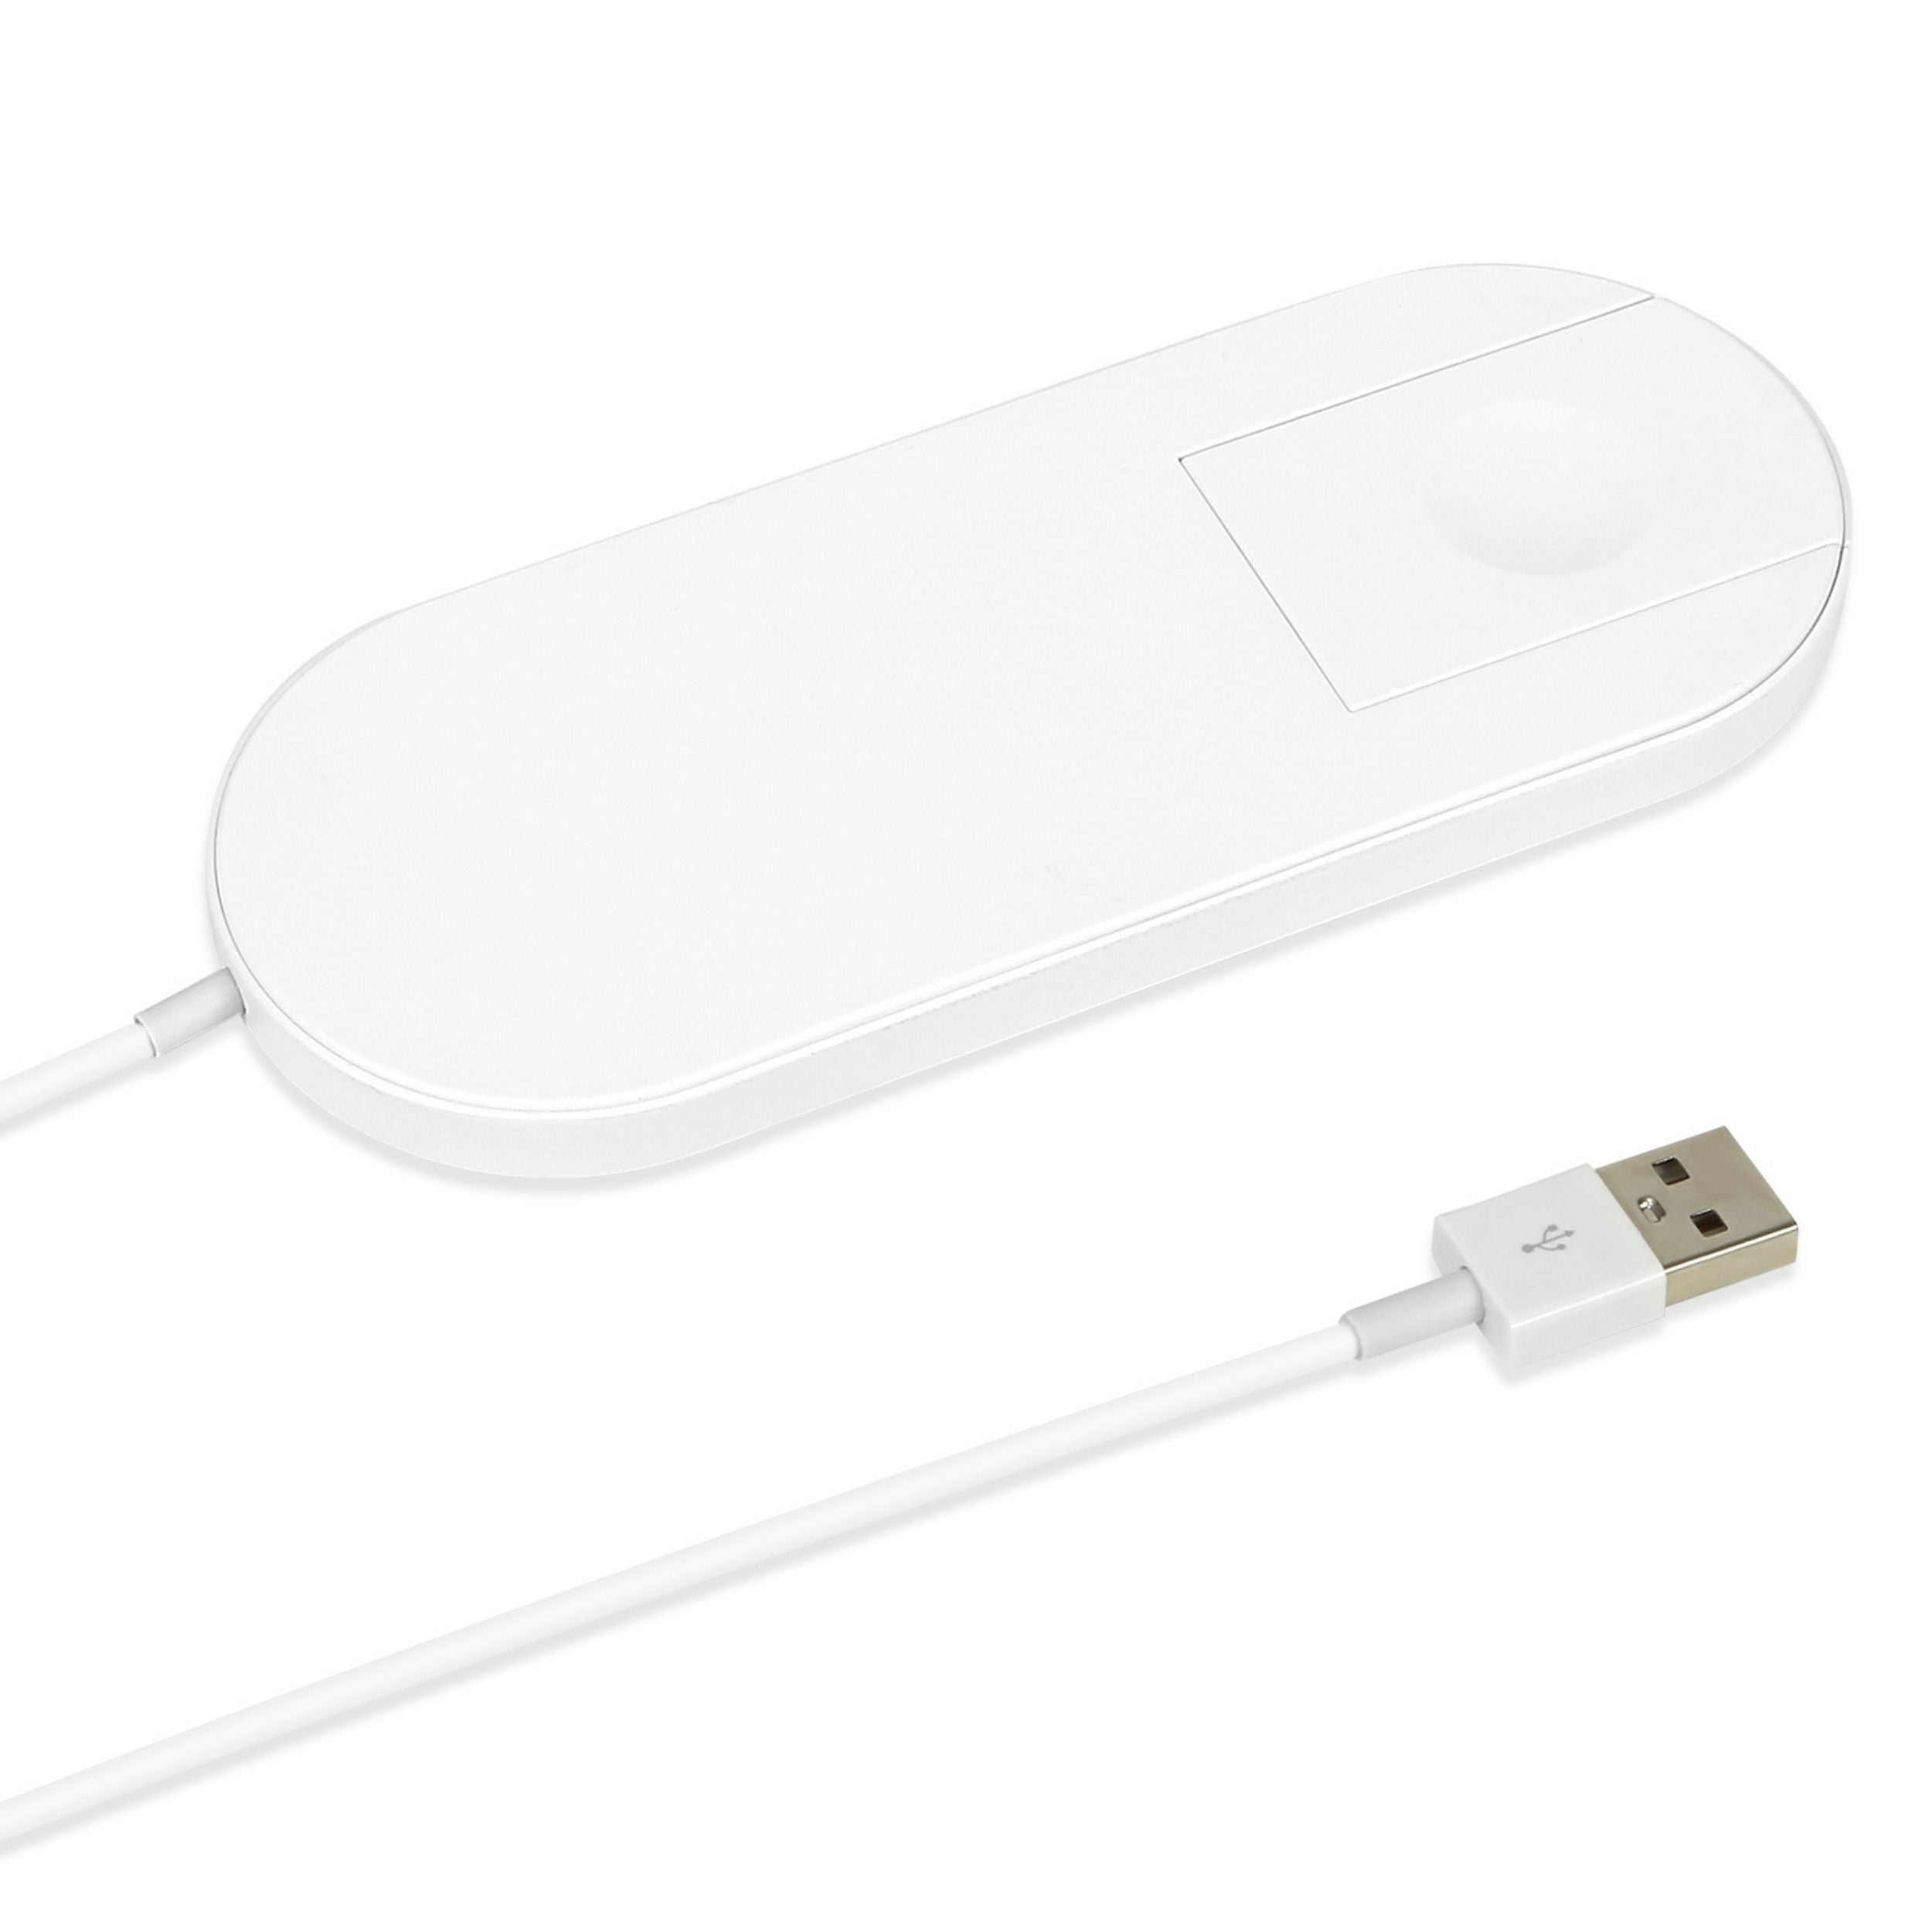 title:10W 2-in-1 Wireless Charger for Apple Watch 4/3/2/1 and iPhone X/XS/8, Qi Charging Pad;color:White